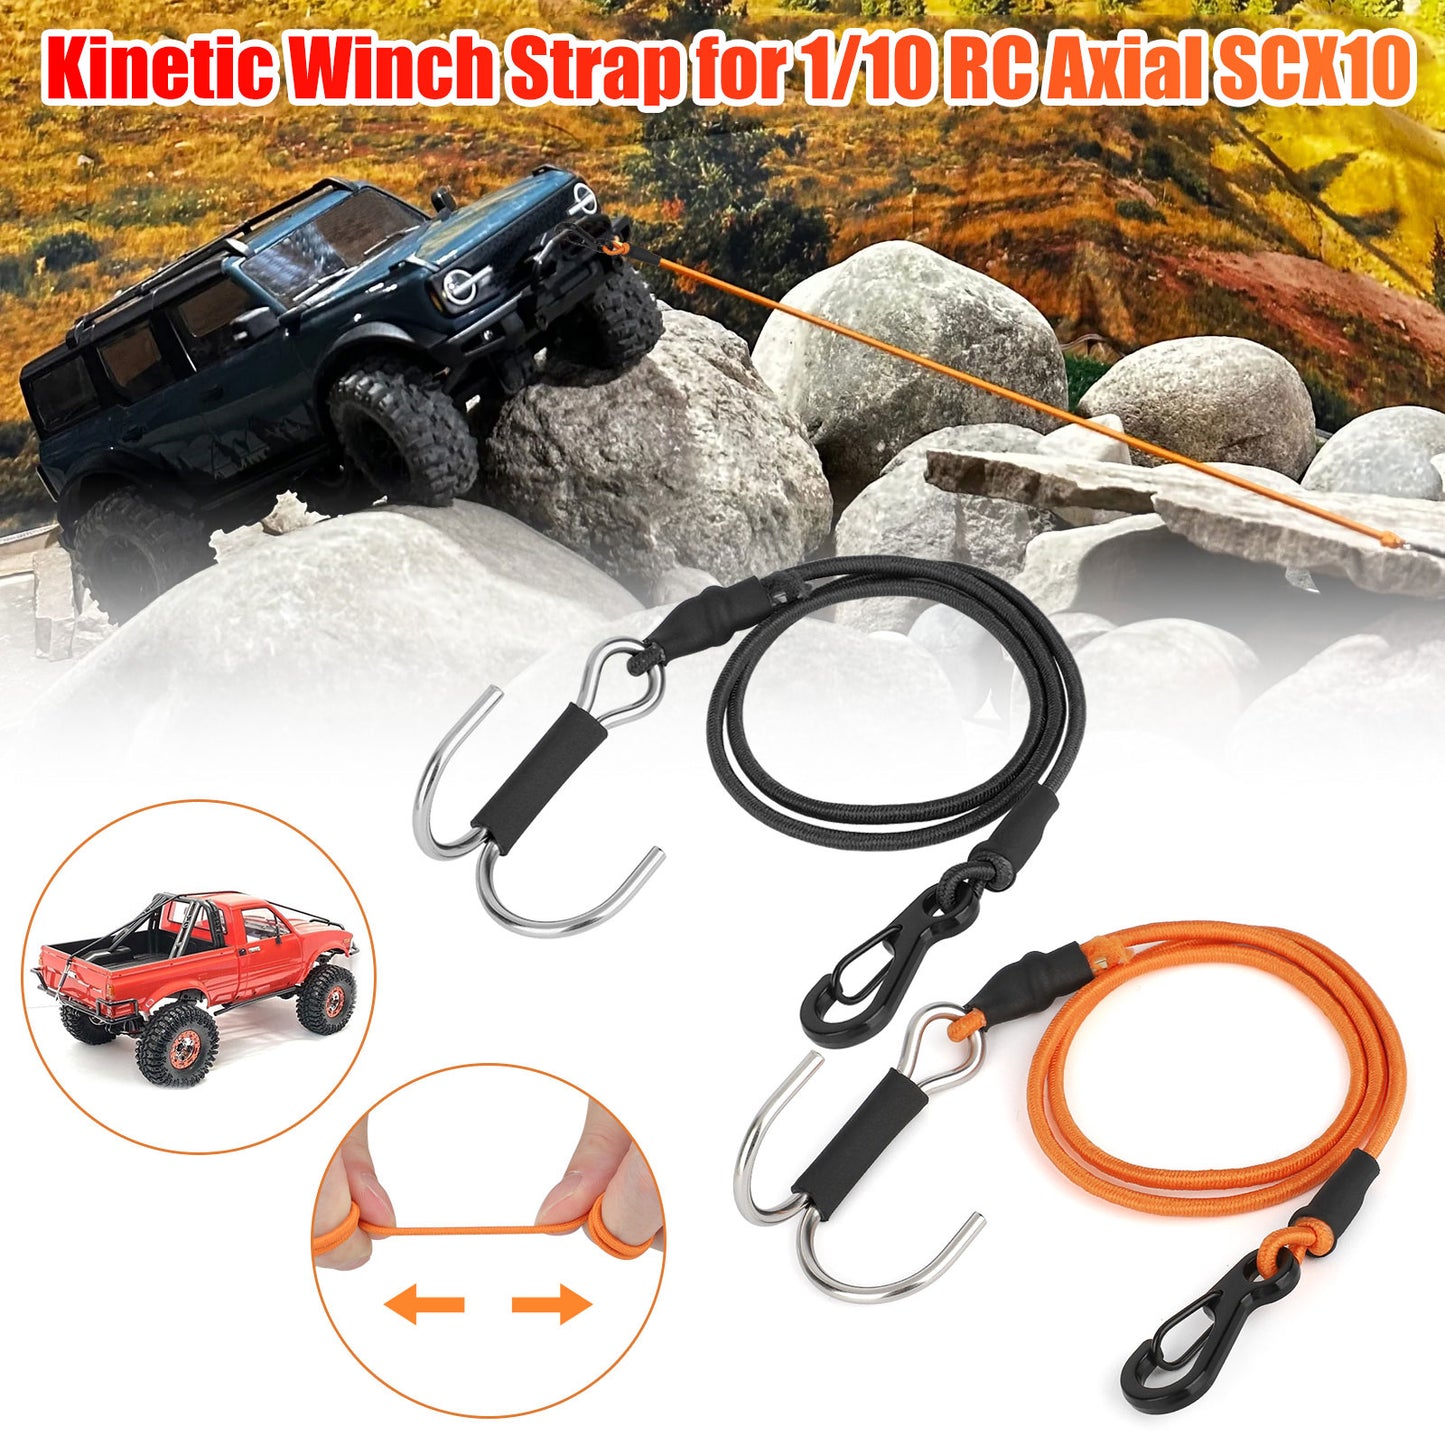 1/10 RC Kinetic Winch Strap